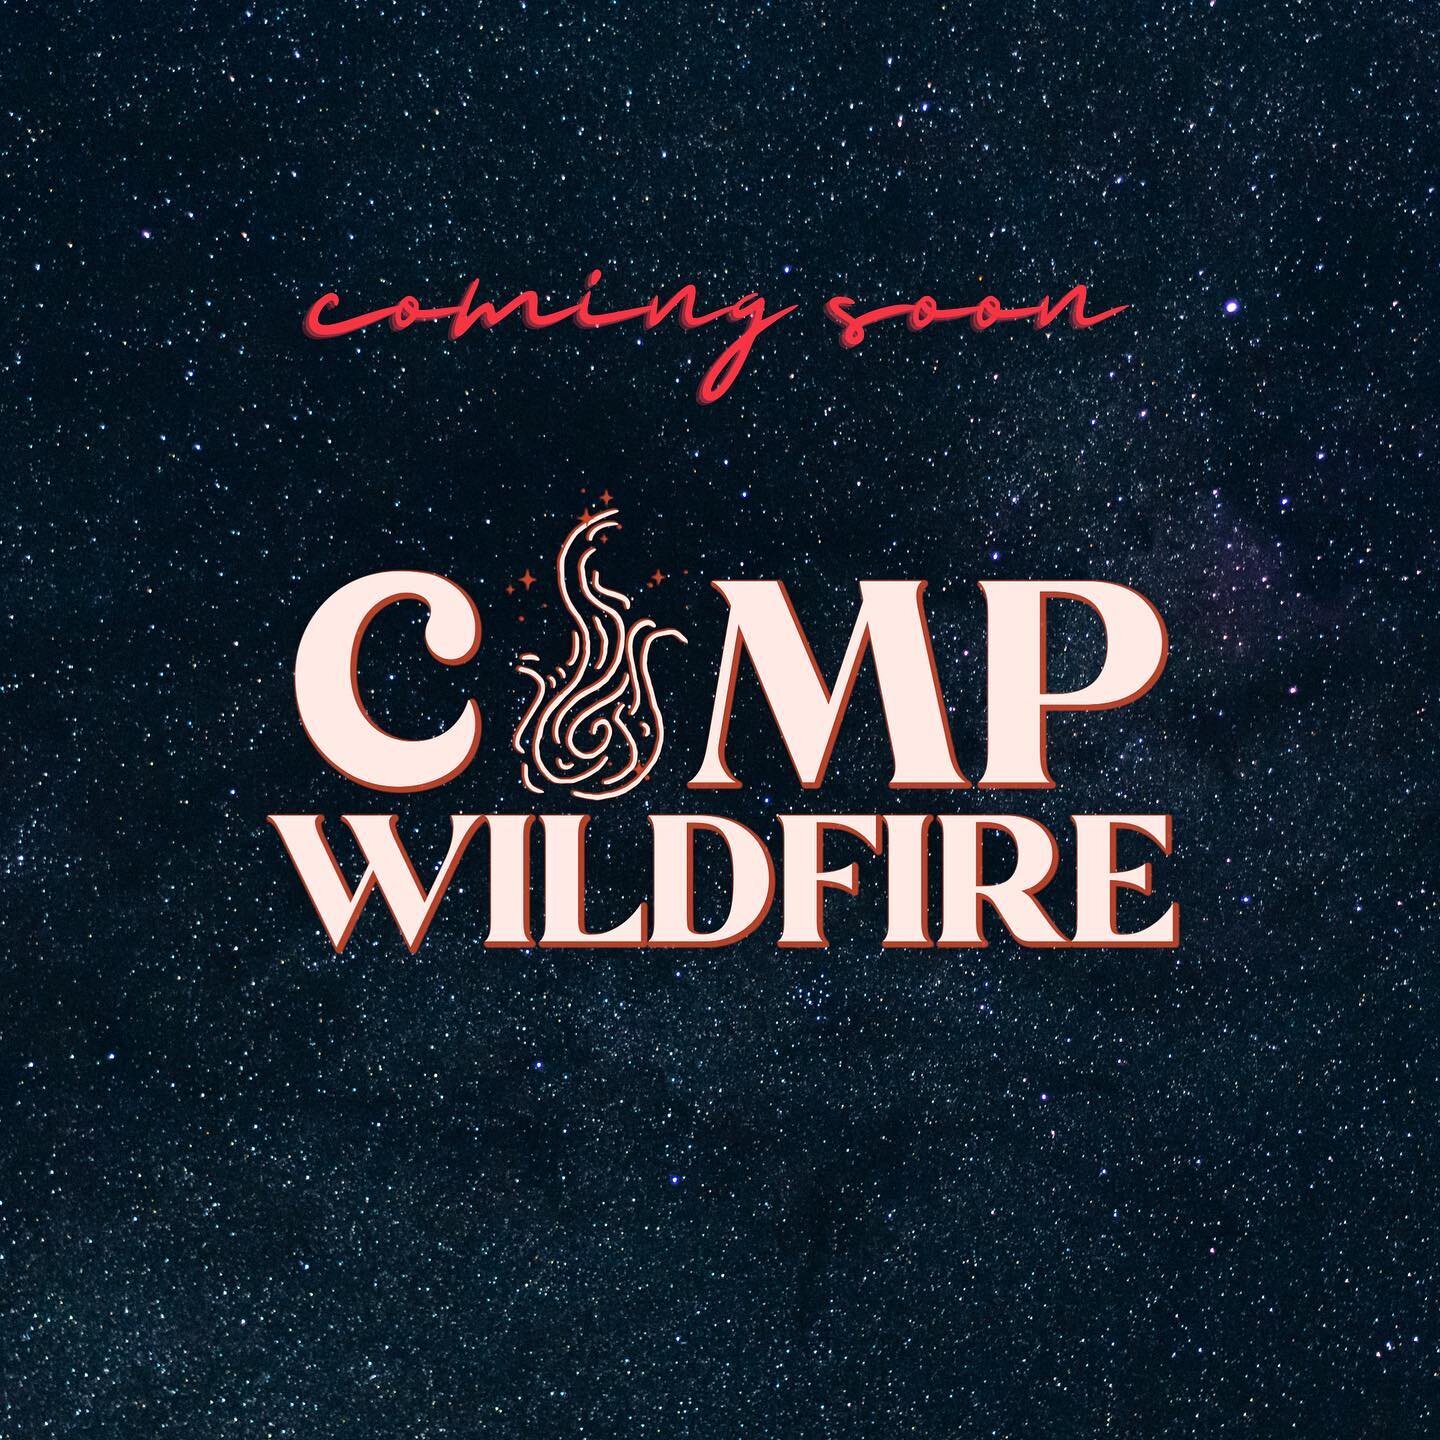 The secret is out.... camp wildfire is coming soon next door and will be focused on helping locals and visitors alike enjoy what our area has to offer outside.  Camp package rentals and basic necessities and fun outdoor toys too, we&rsquo;ll have you